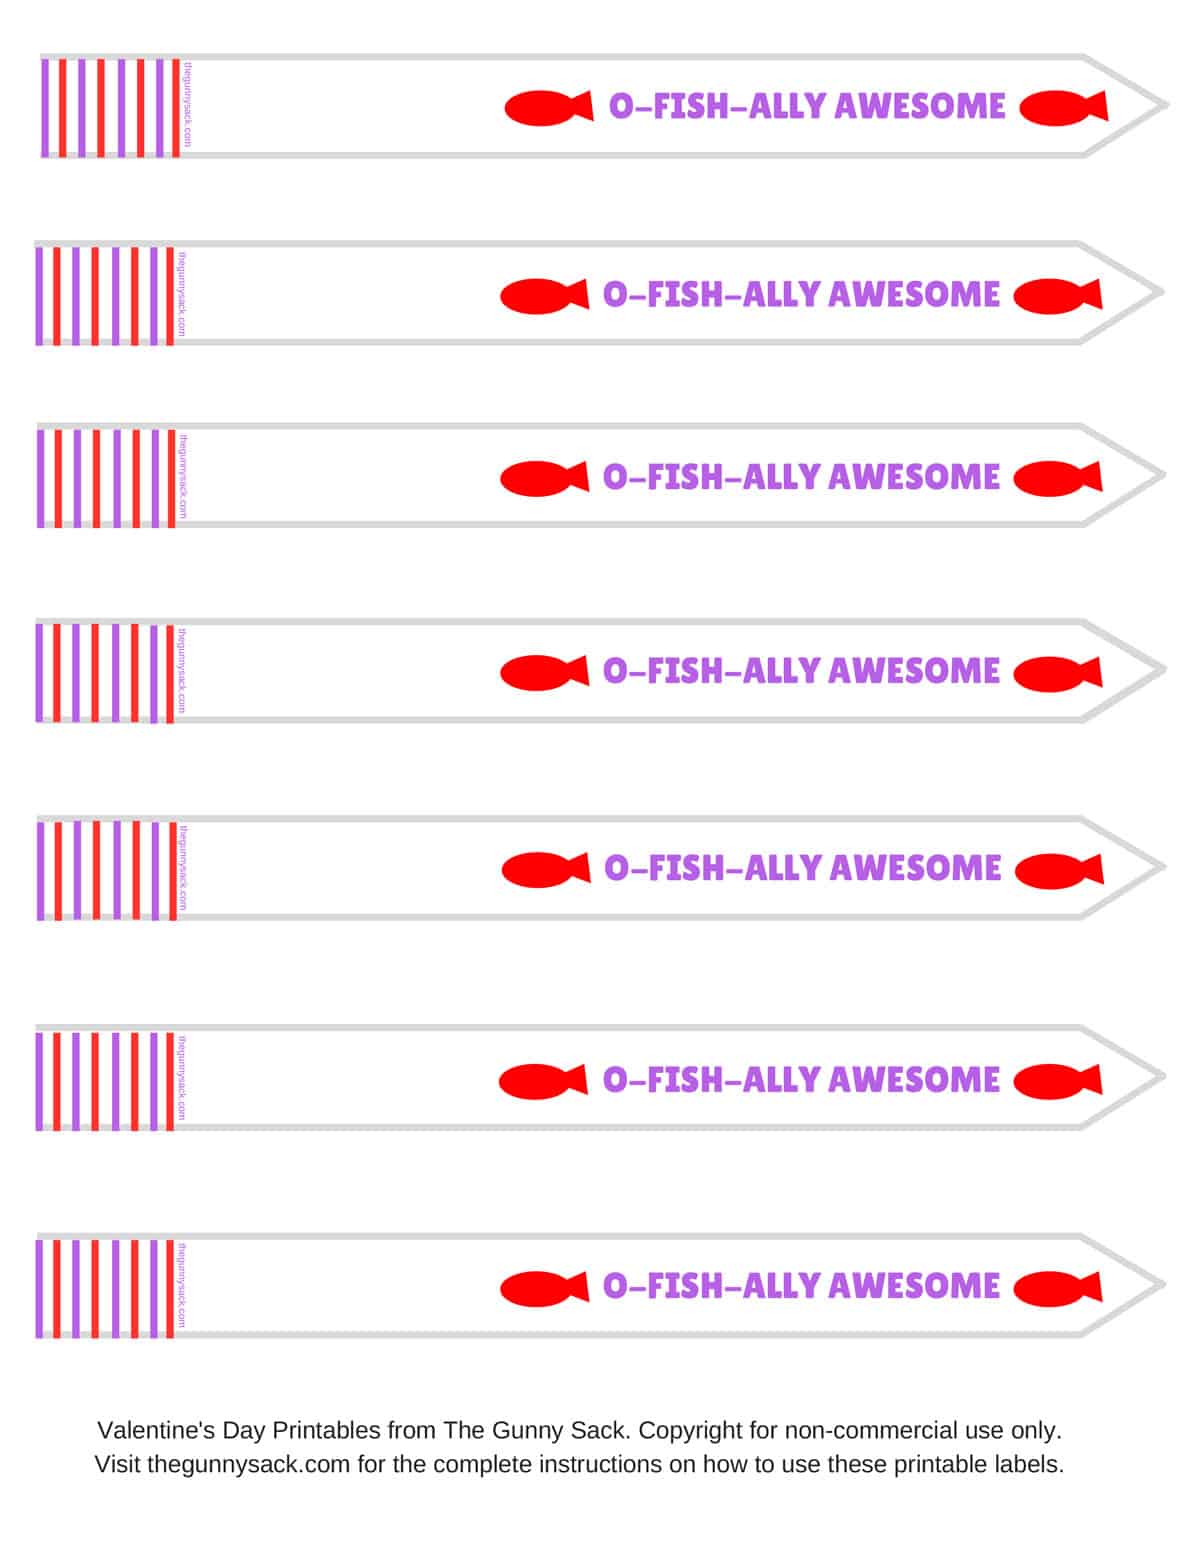 O-FISH-Ally Awesome Test Tube Label